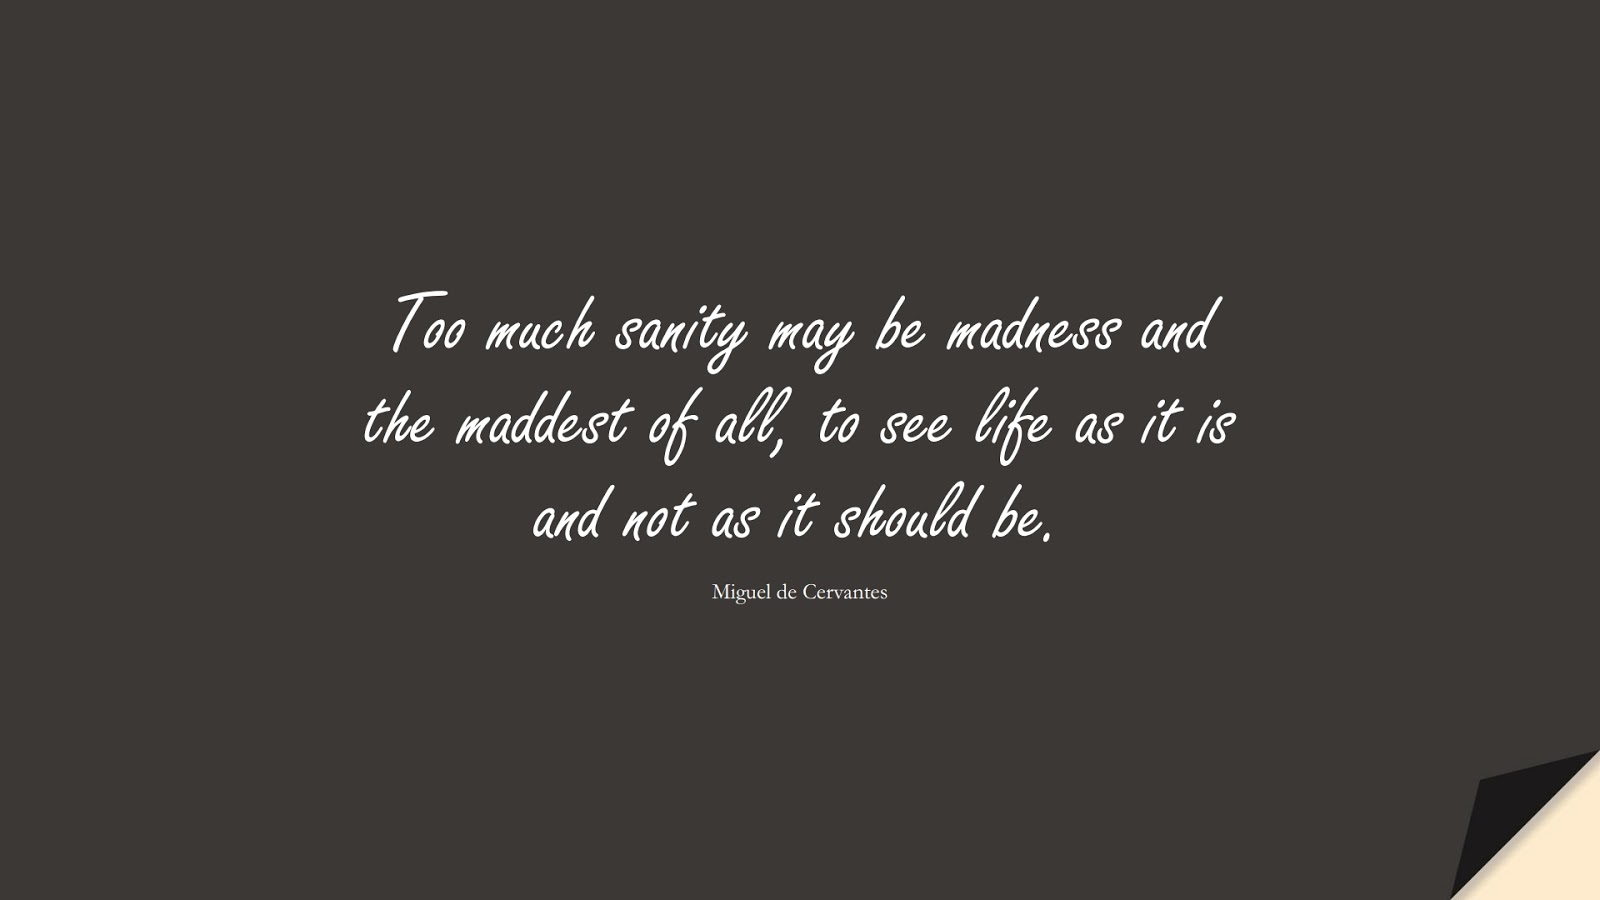 Too much sanity may be madness and the maddest of all, to see life as it is and not as it should be. (Miguel de Cervantes);  #InspirationalQuotes